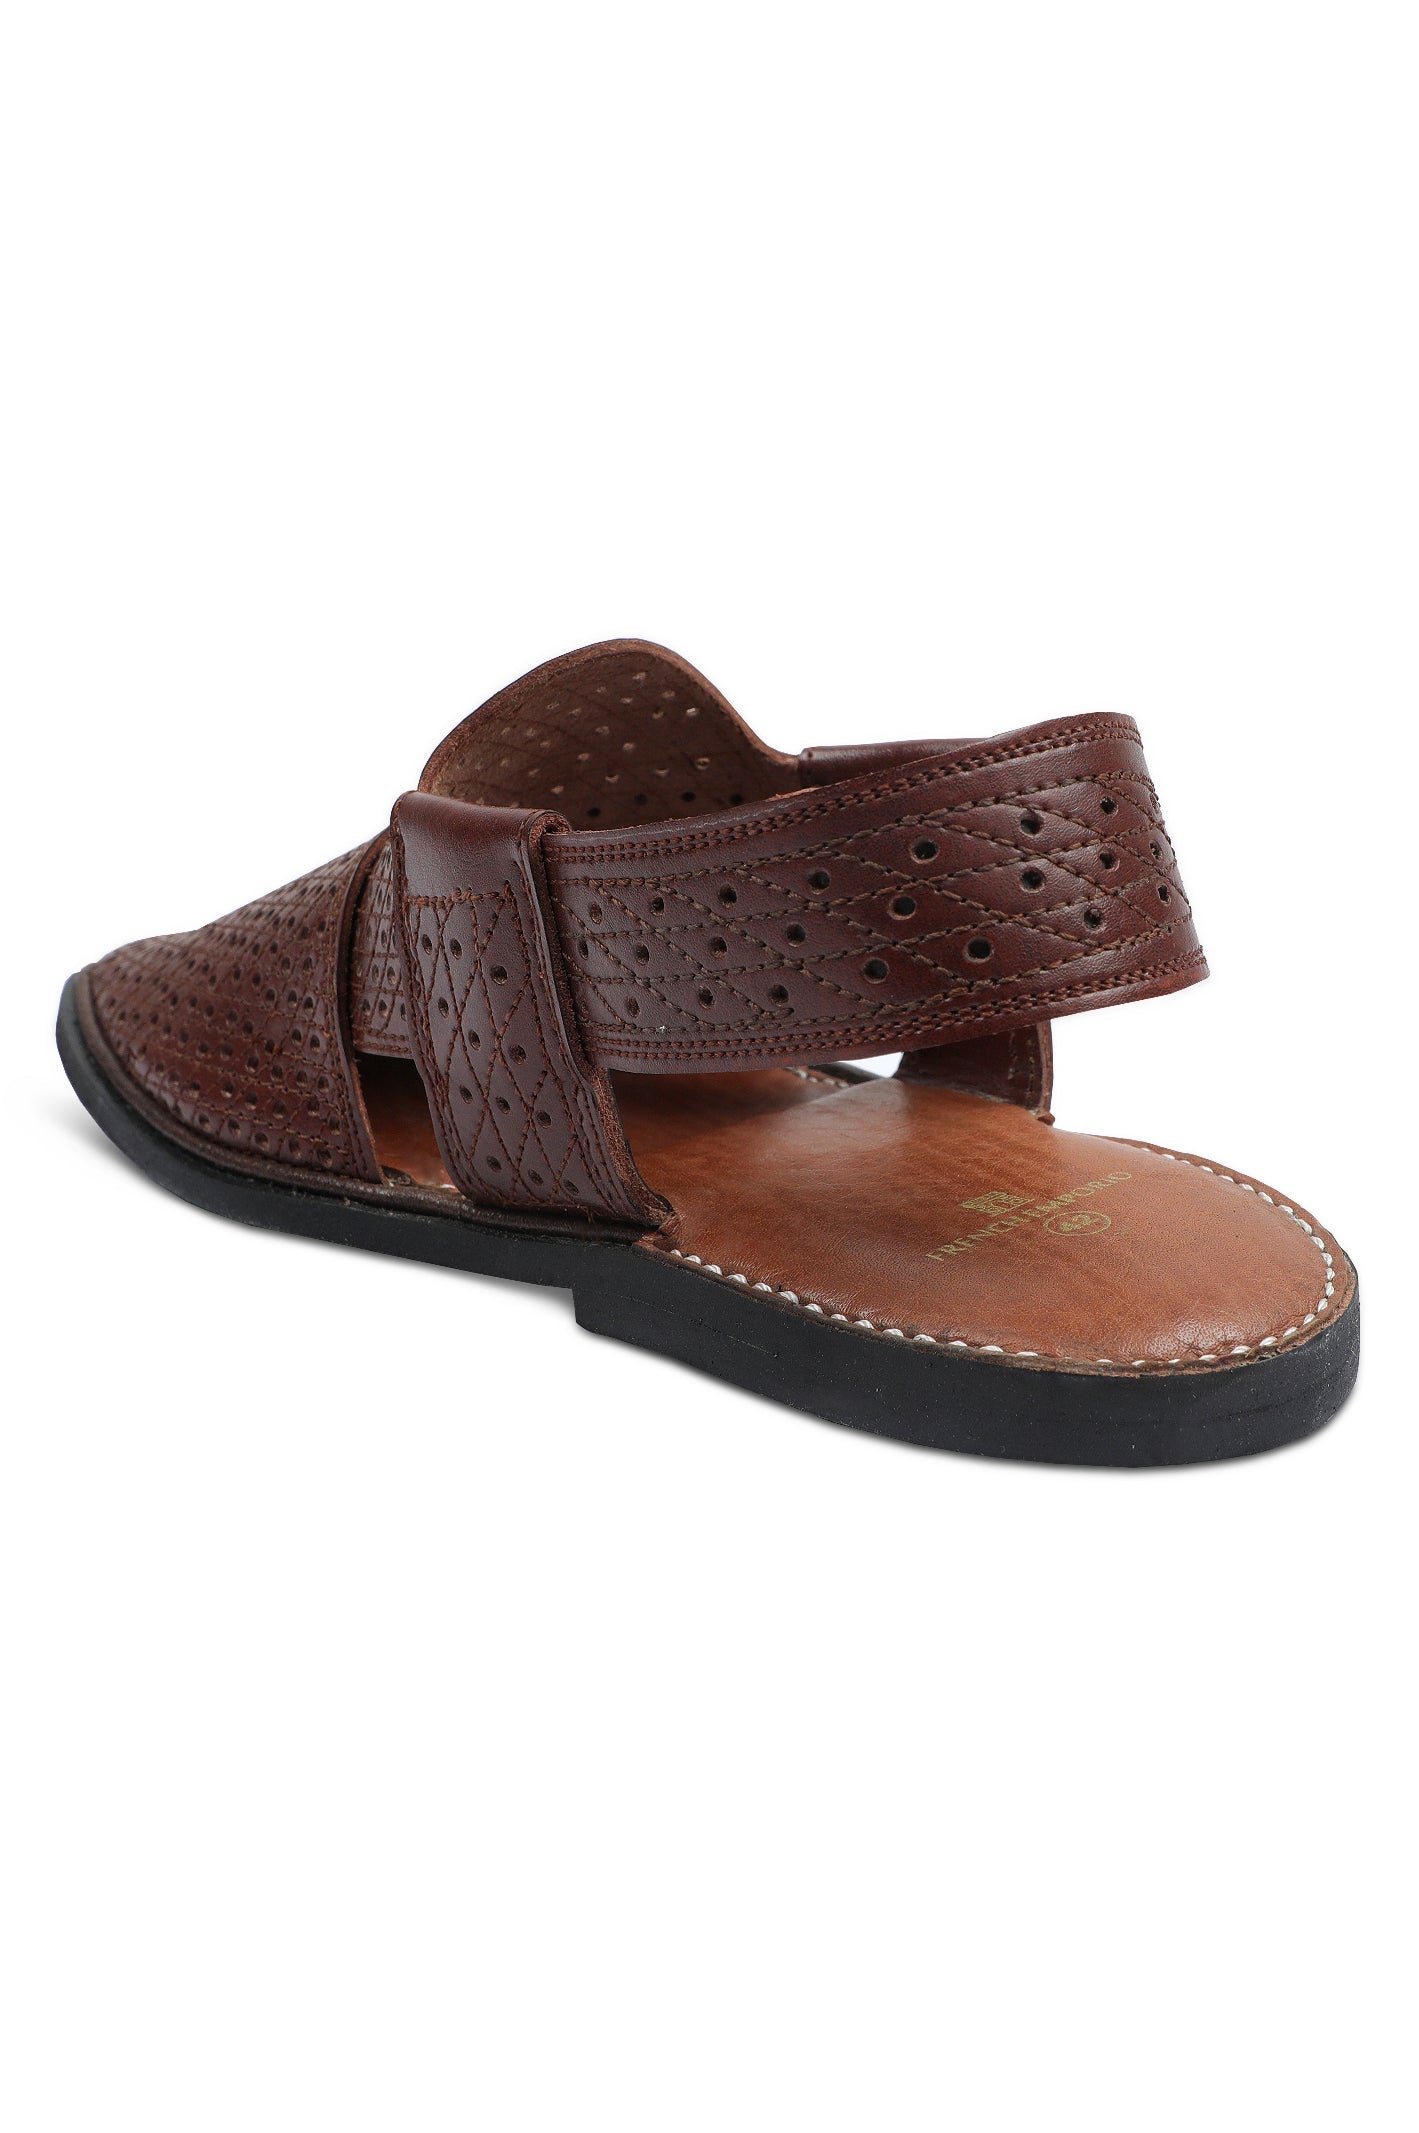 French Emporio Men Sandals SKU: PSLD-0038-BROWN - Diners